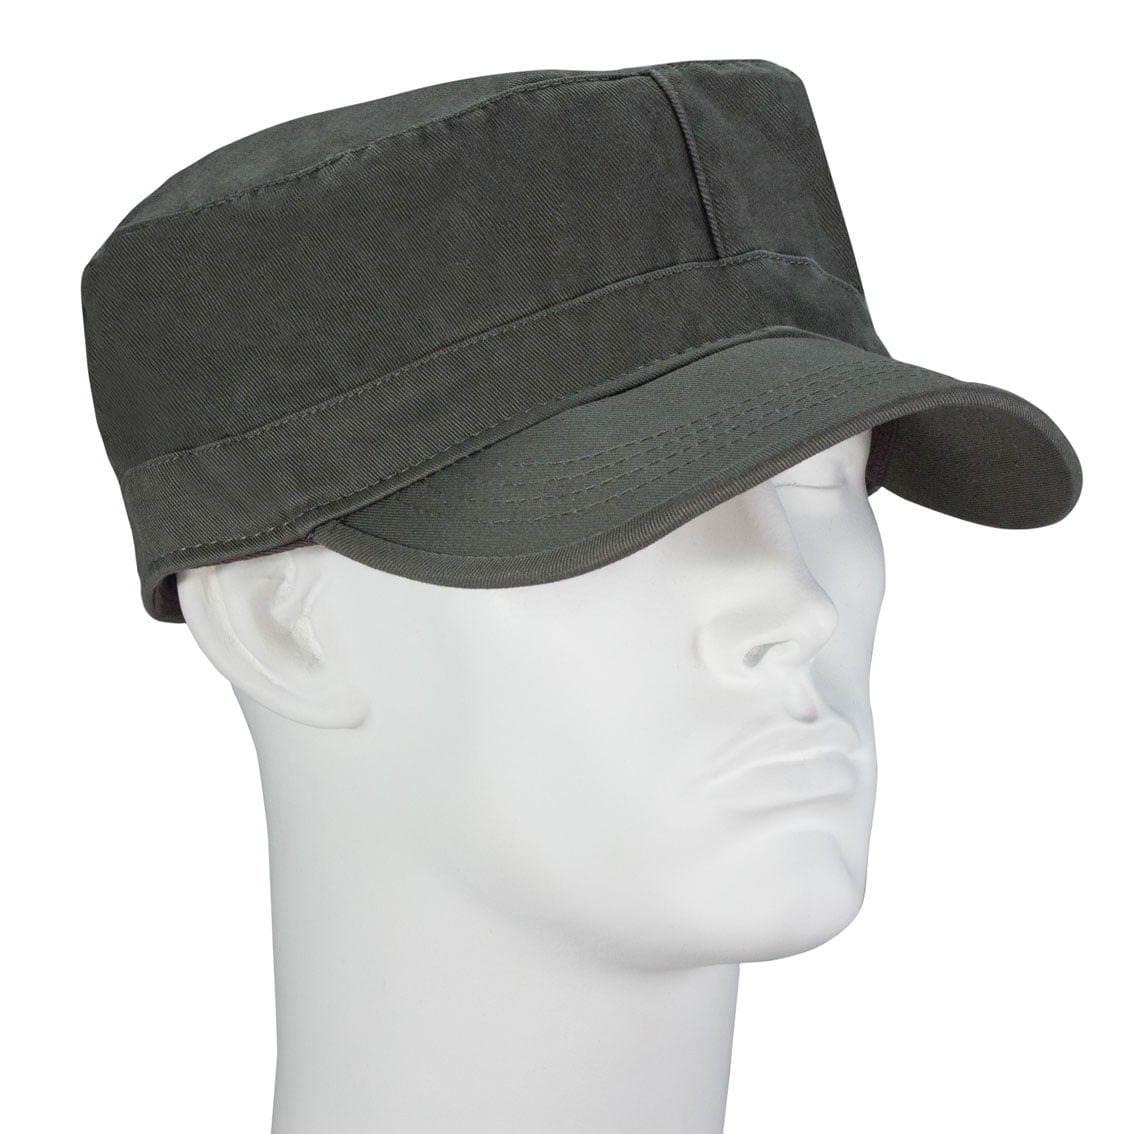 1pc Olive Plain Castro Military Fatigue Army Hat - Fitted - Unconstructed - 100% Cotton